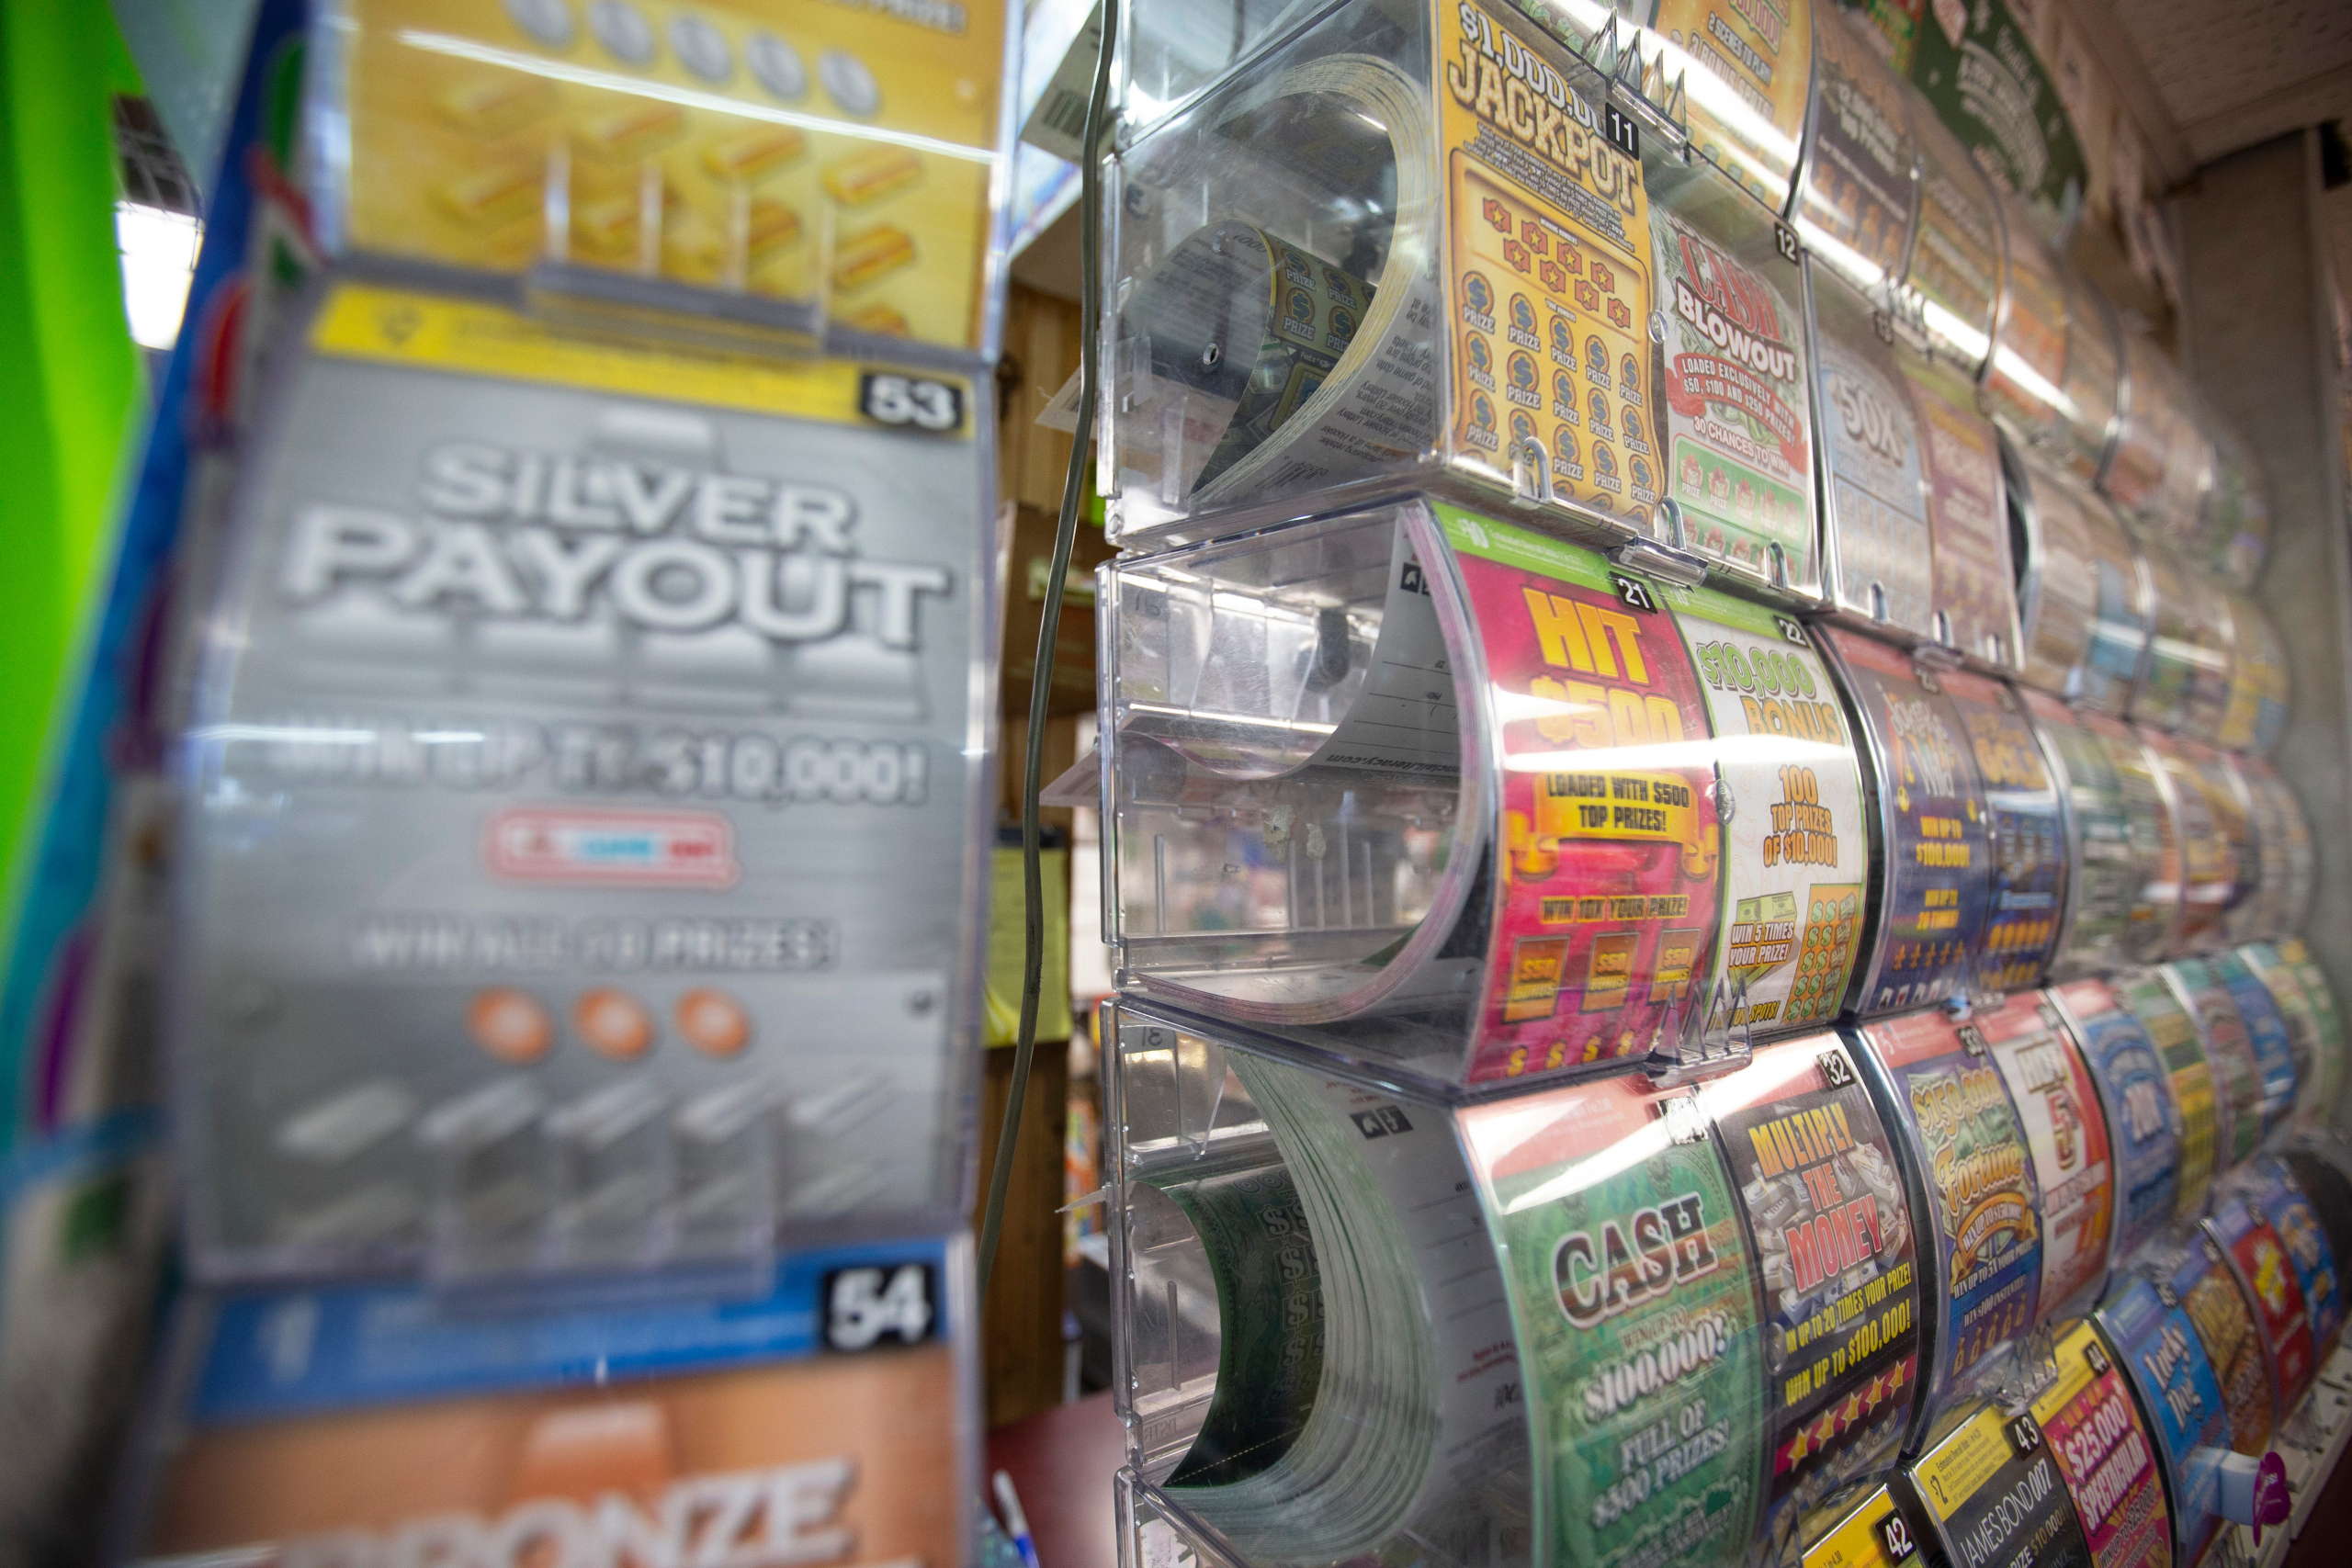 Chicago man wins $1M from Illinois Lottery scratch-off ticket